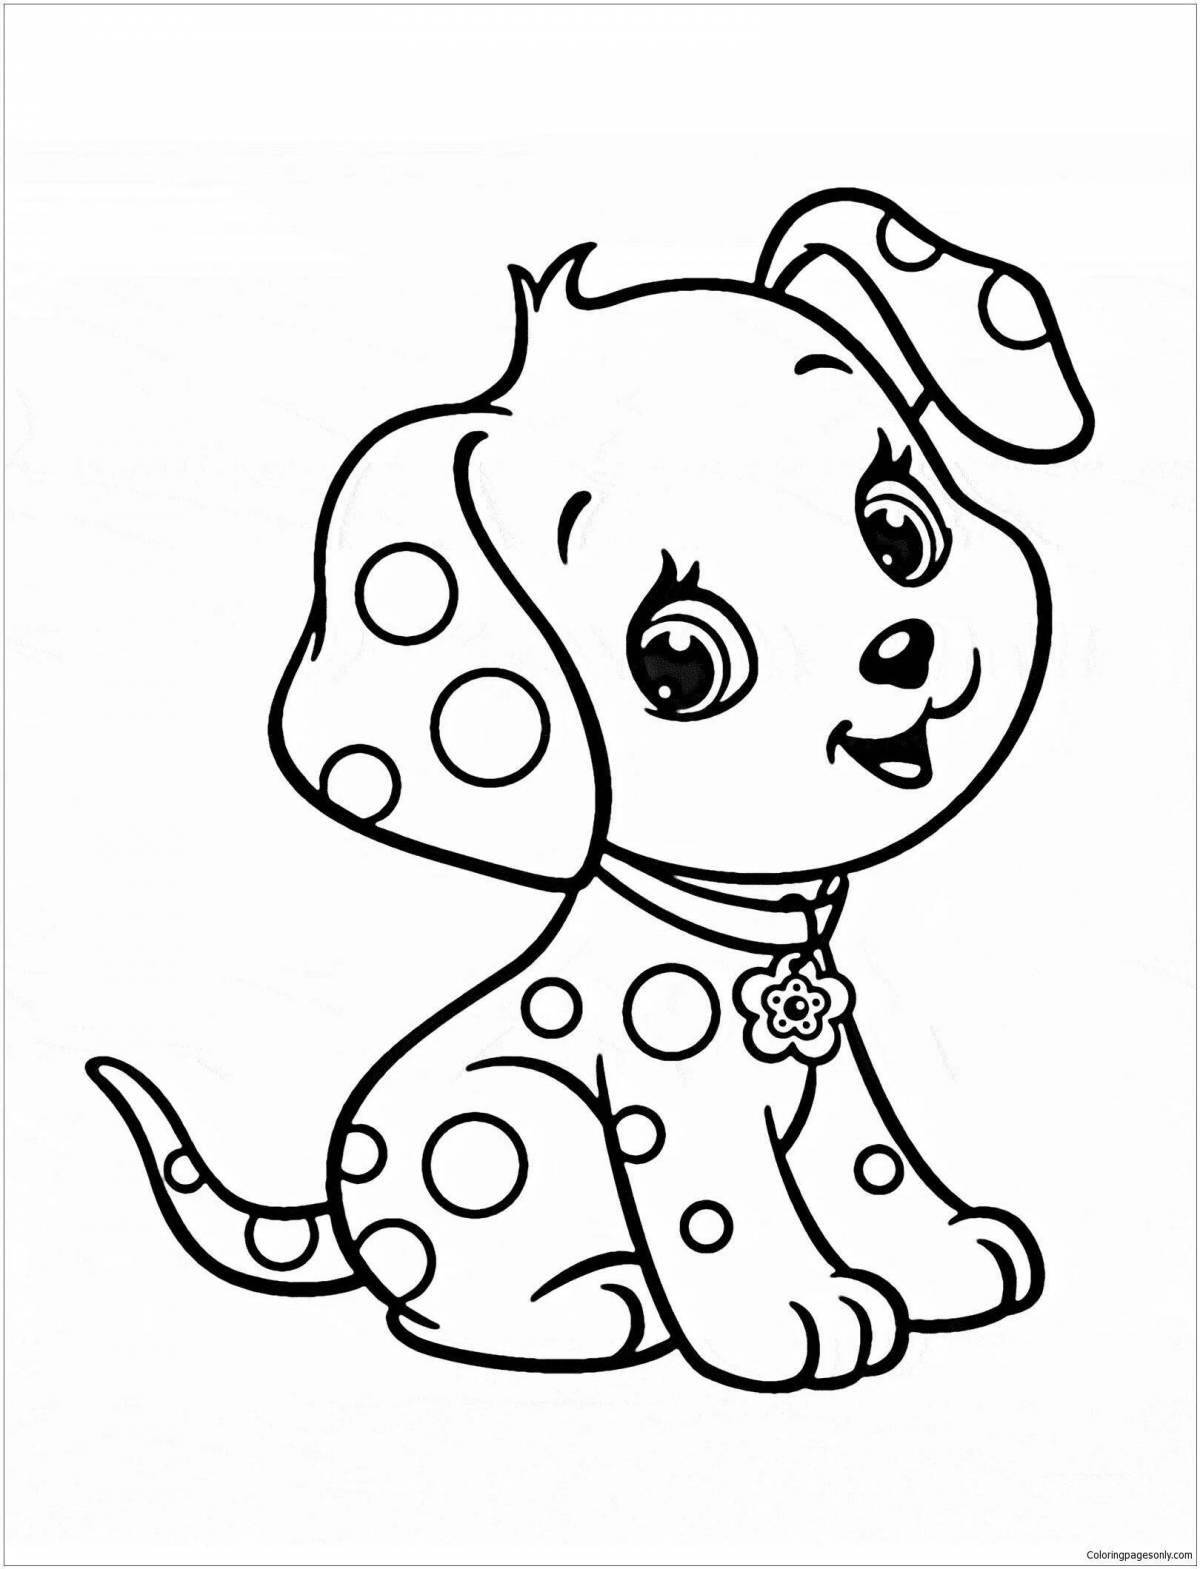 Animated dog coloring book for children 2-3 years old